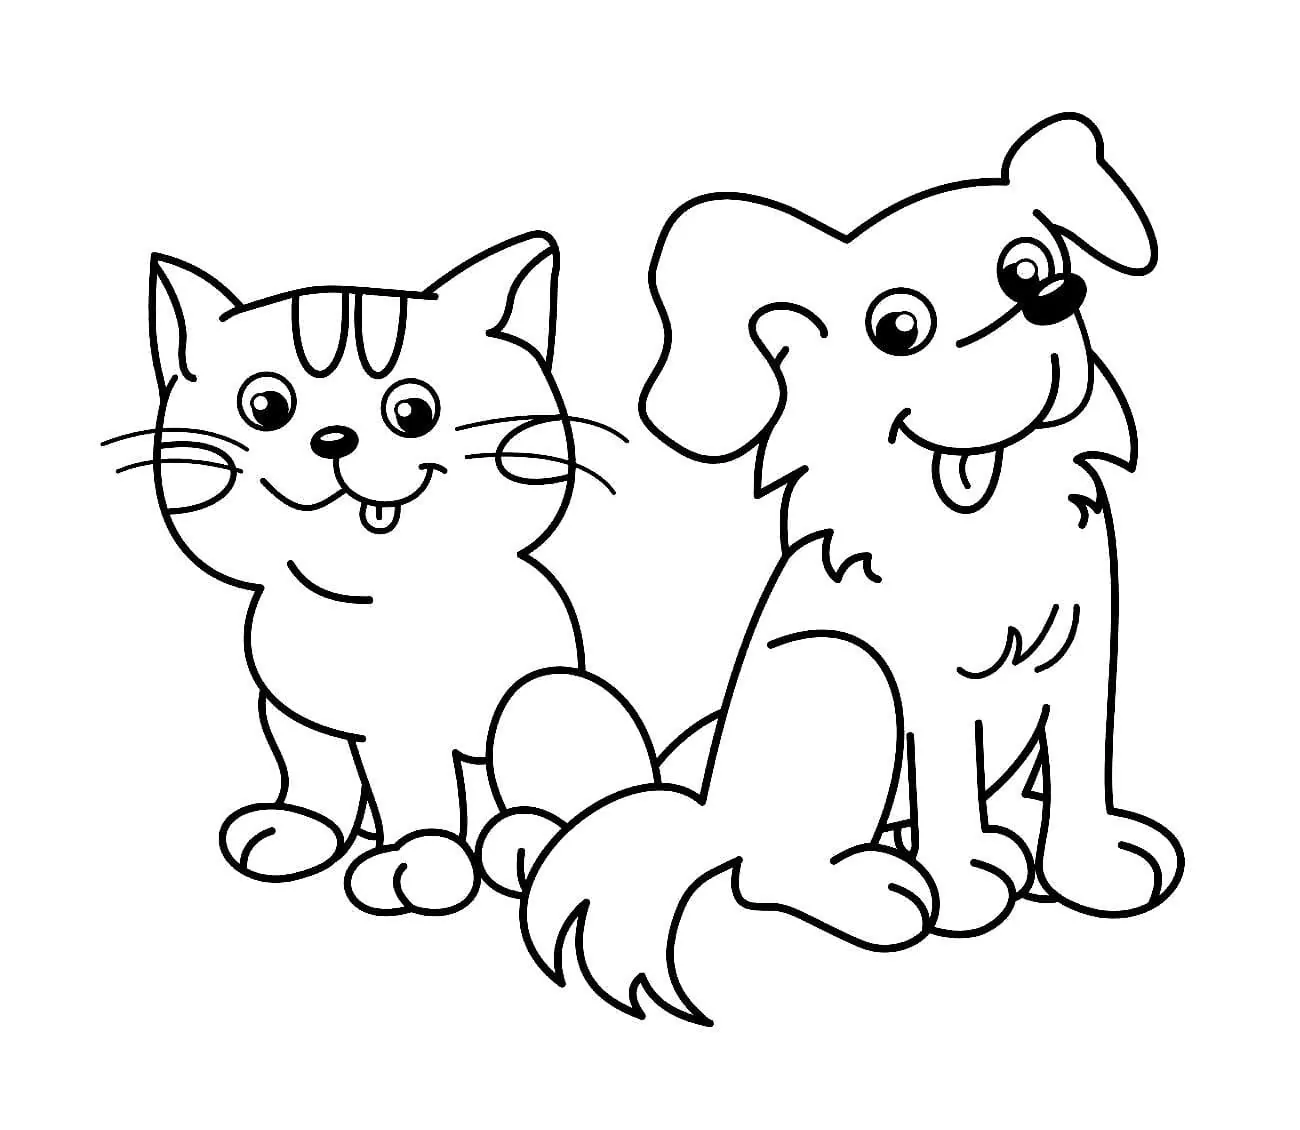 Simple Cat and Dog